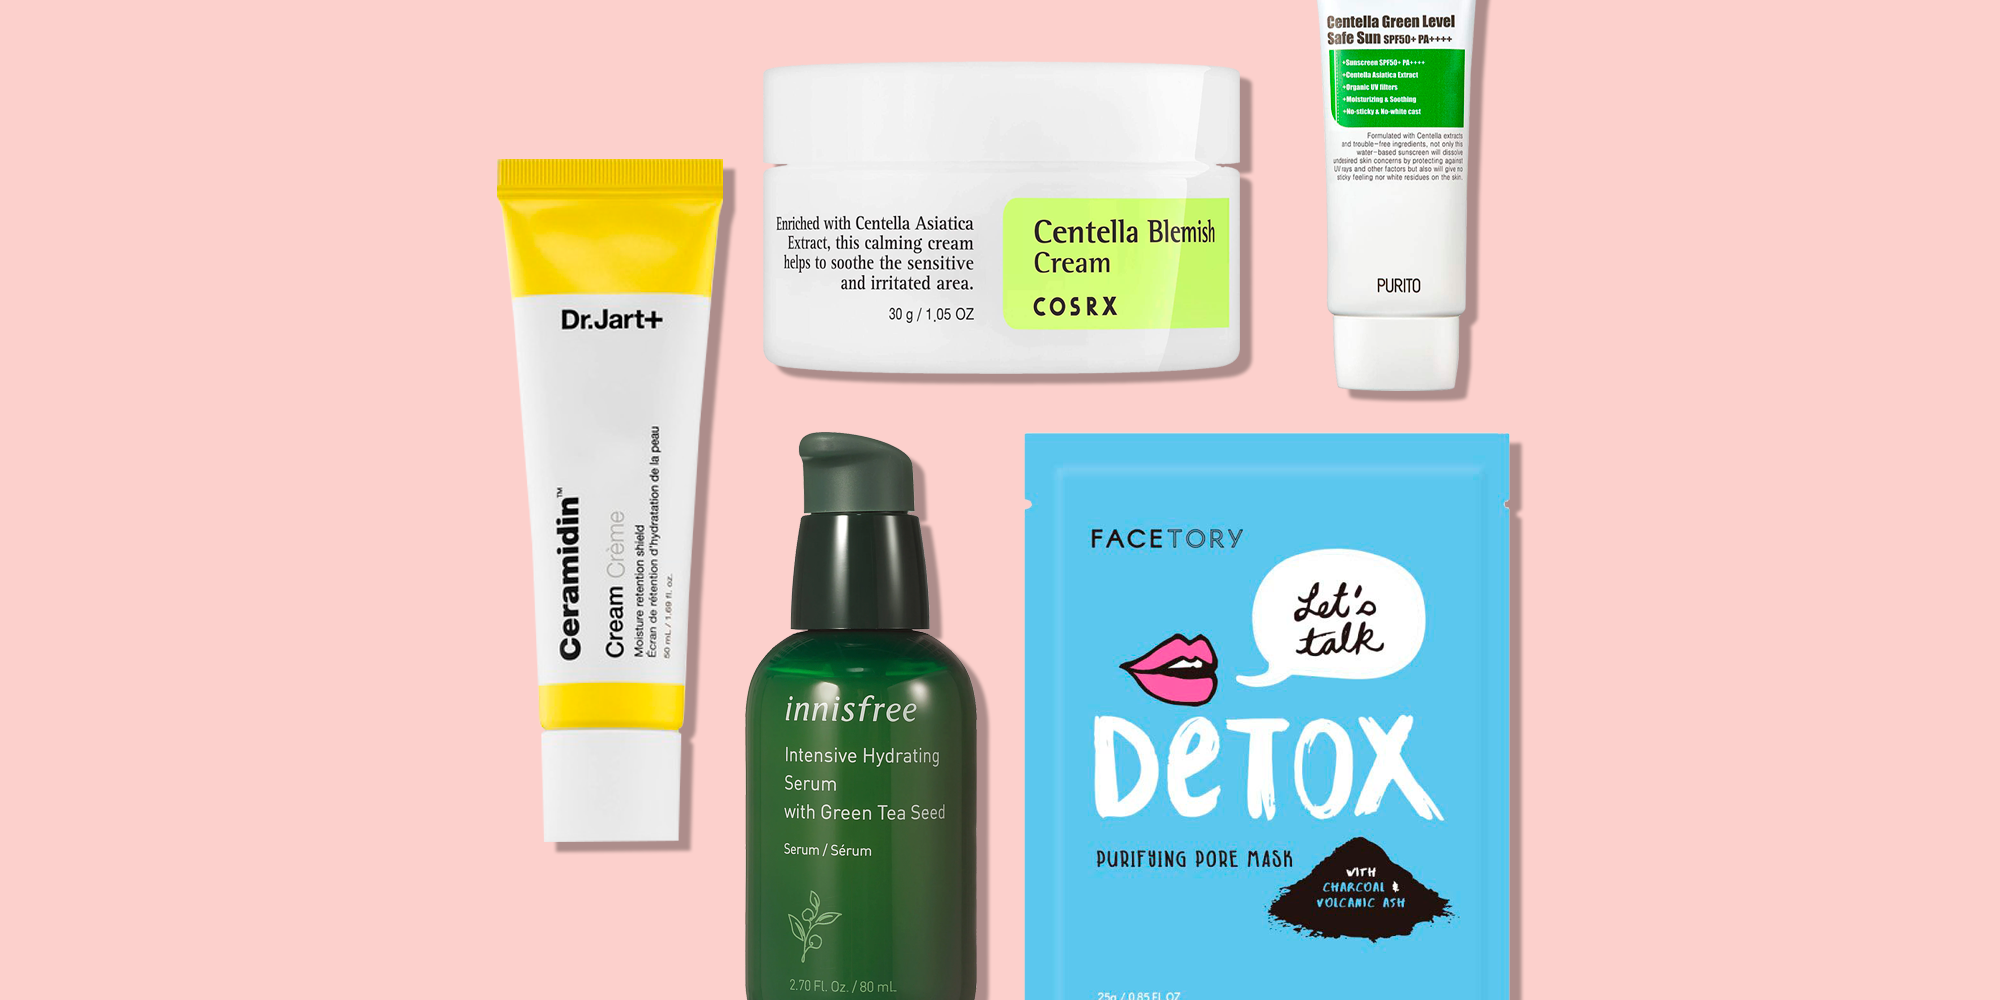 The Best Korean Skincare Products, According To The Experts